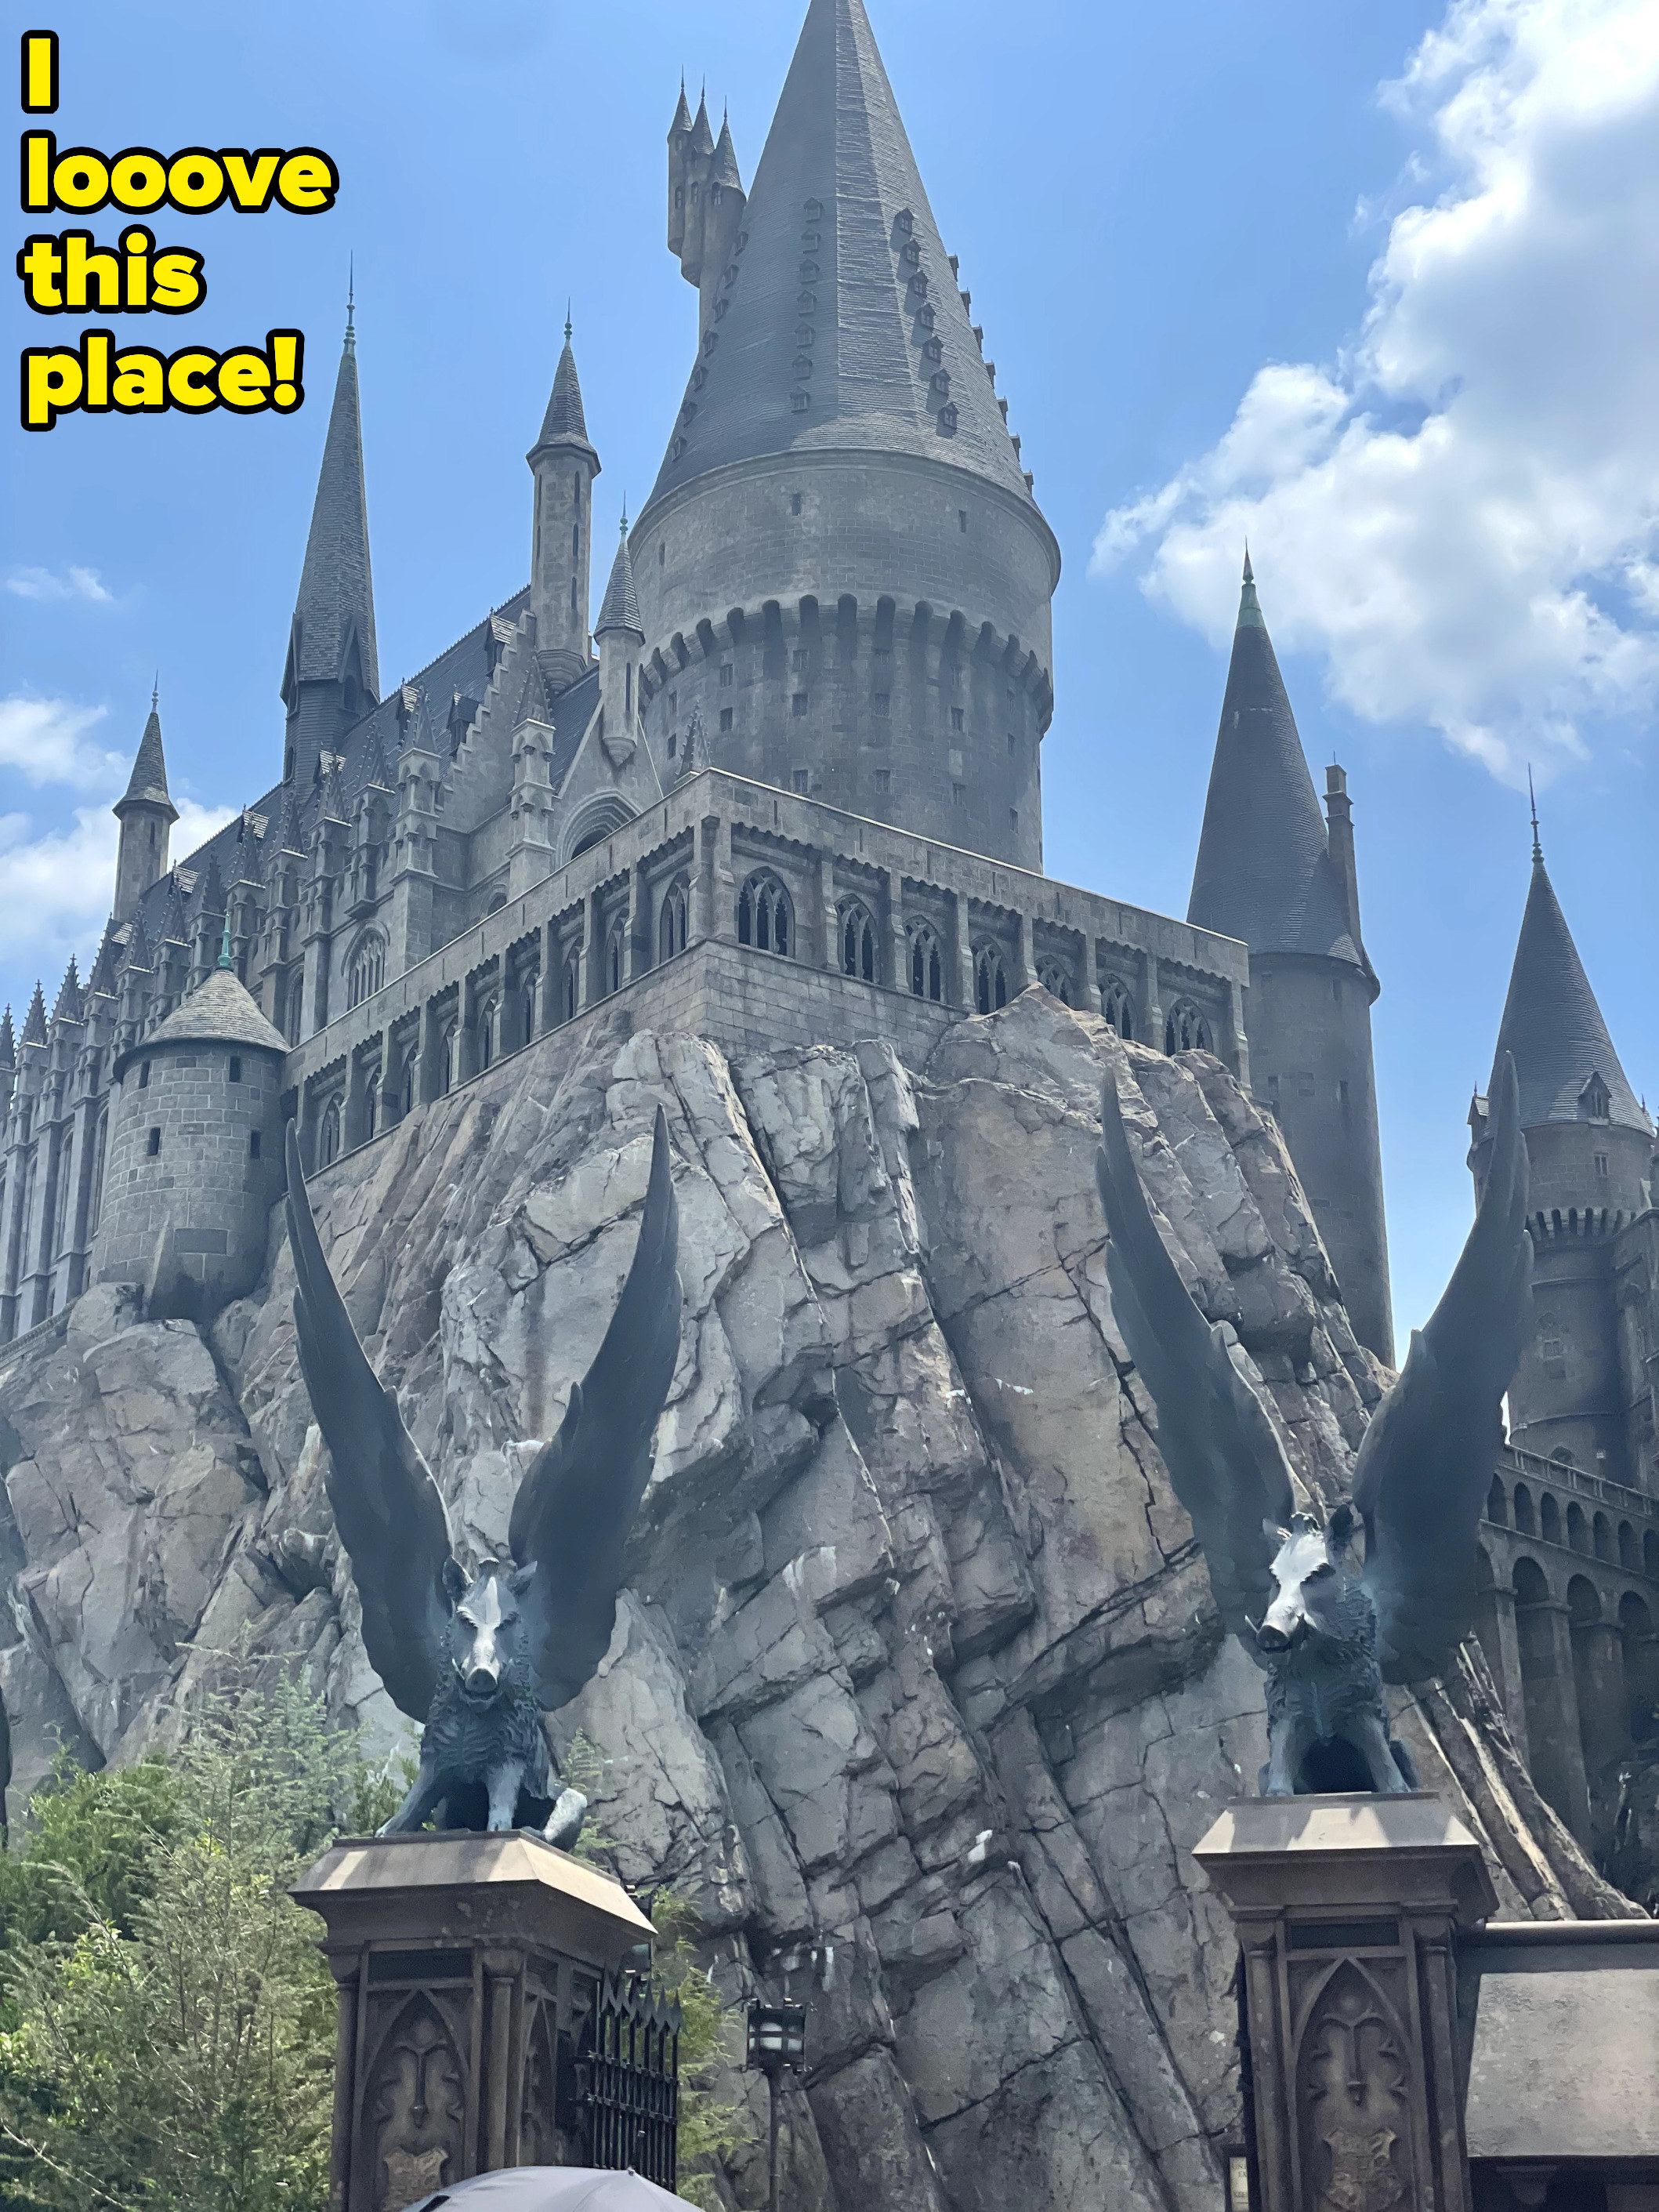 A photo of a giant re-creation of Hogwarts